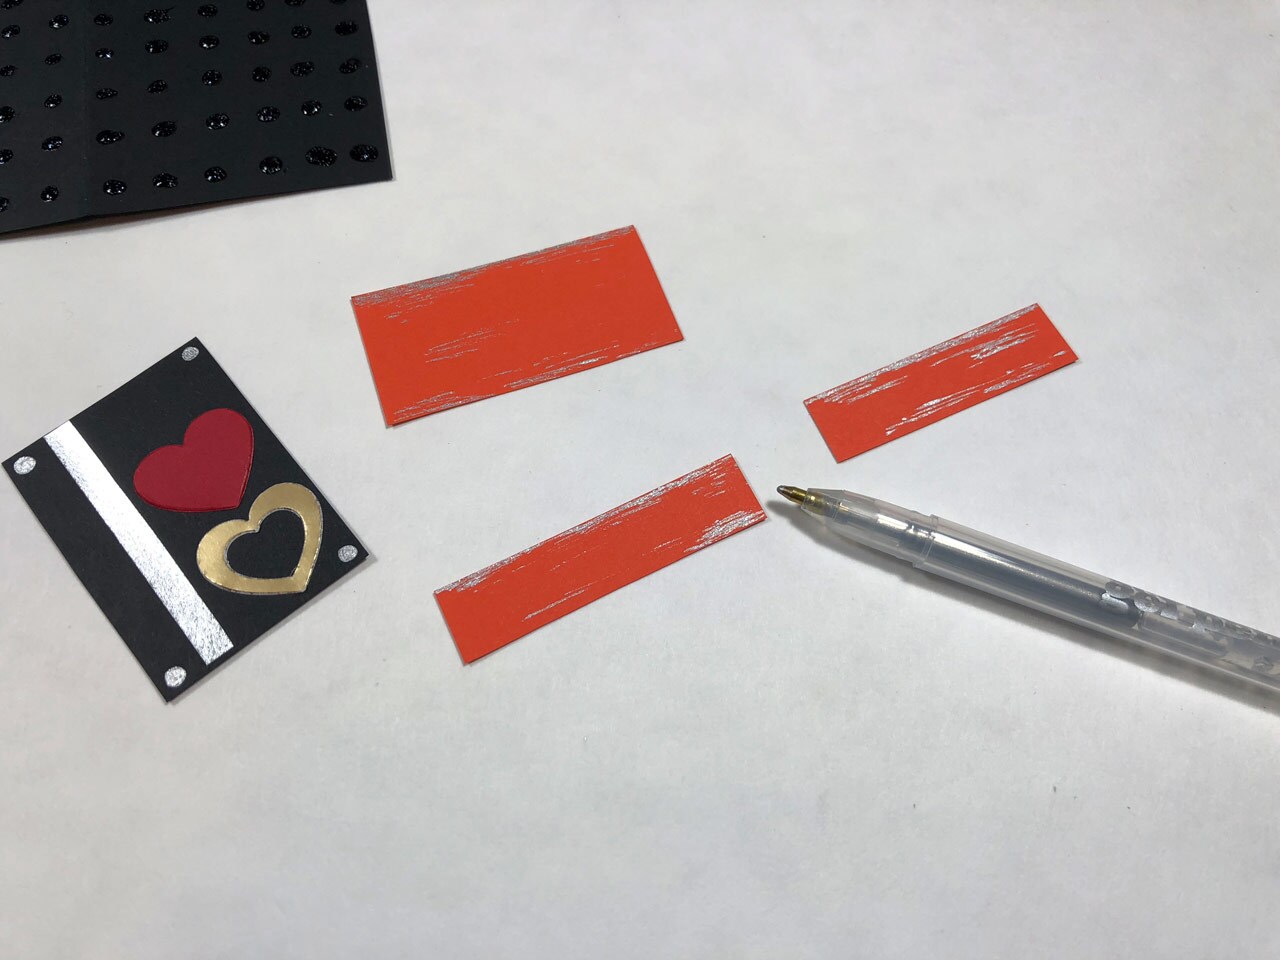 Strips of orange cardstock, black cardstock with red and gold hearts and a strip of silver metalllic cardstock glued to it, and a silver gel pen. This is a Rose Tico-inspired Electro-Shock Prod Valentine's Day Card in progress.